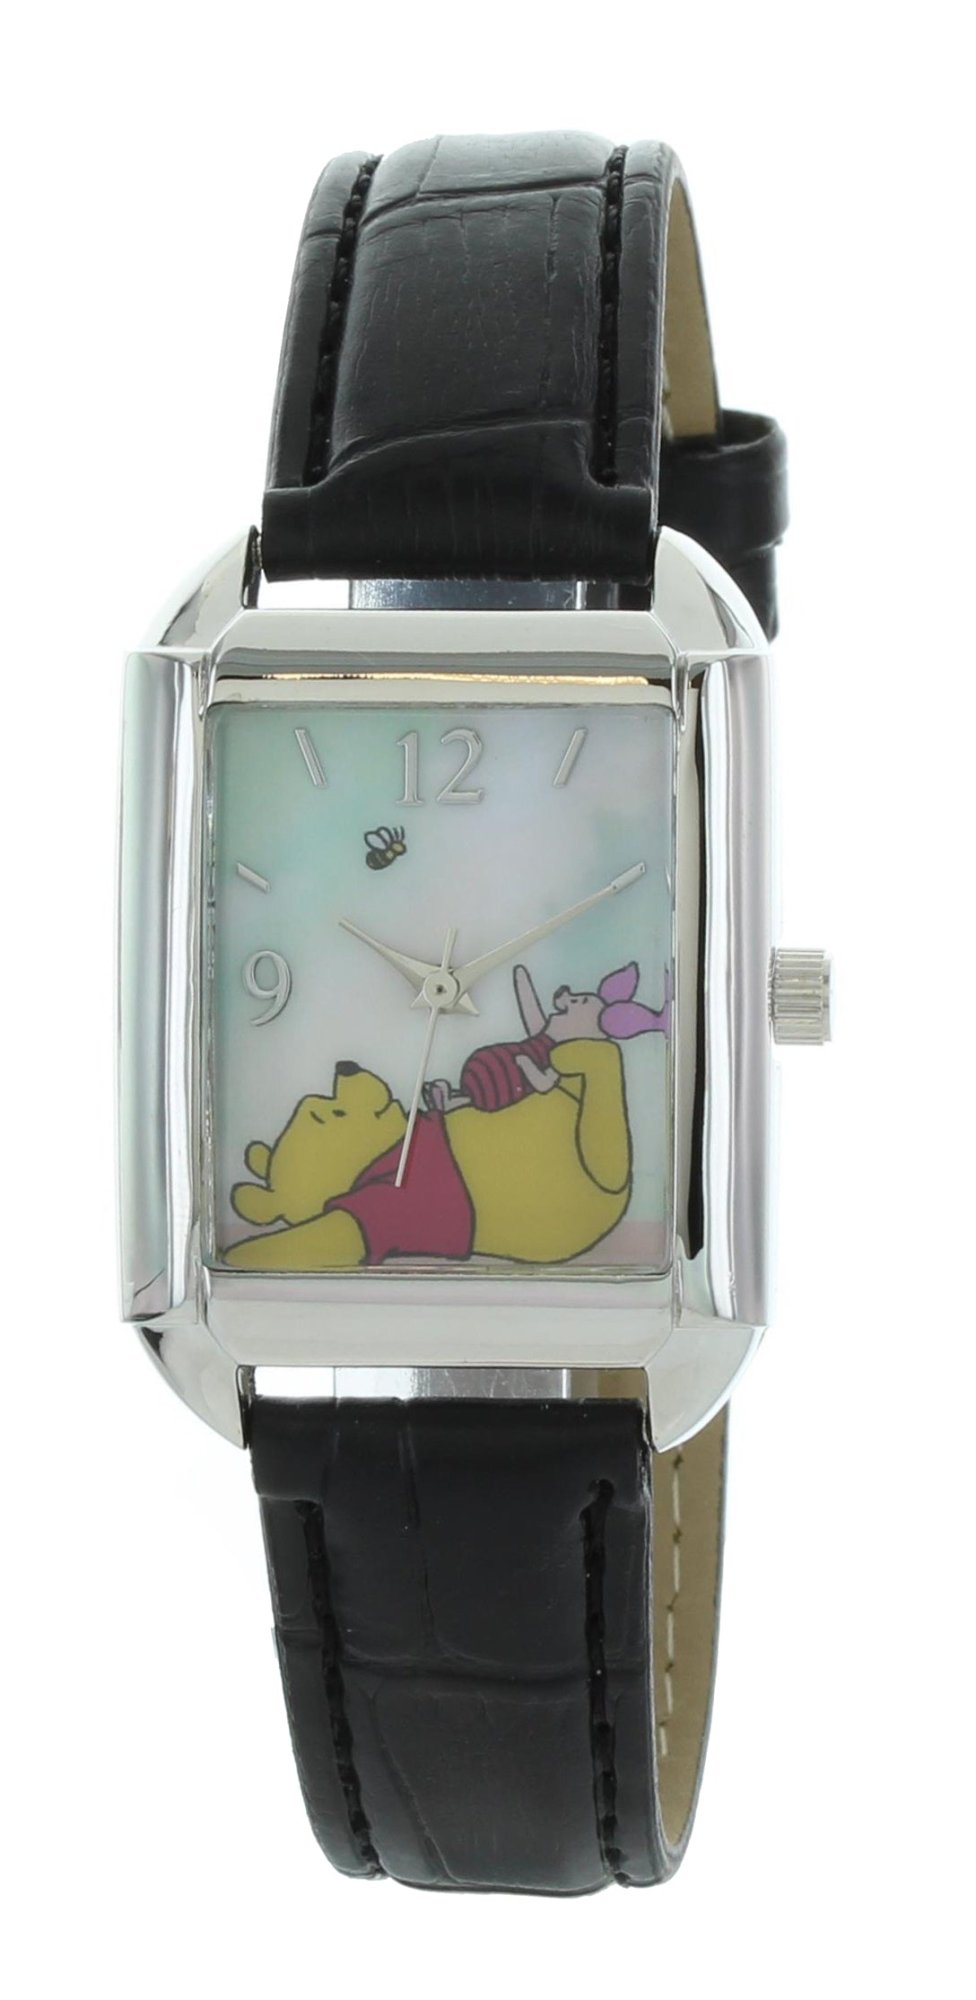 Model: Women’s Disney Watch Features Winnie Pooh and Piglet Watching a Beeh Black Band